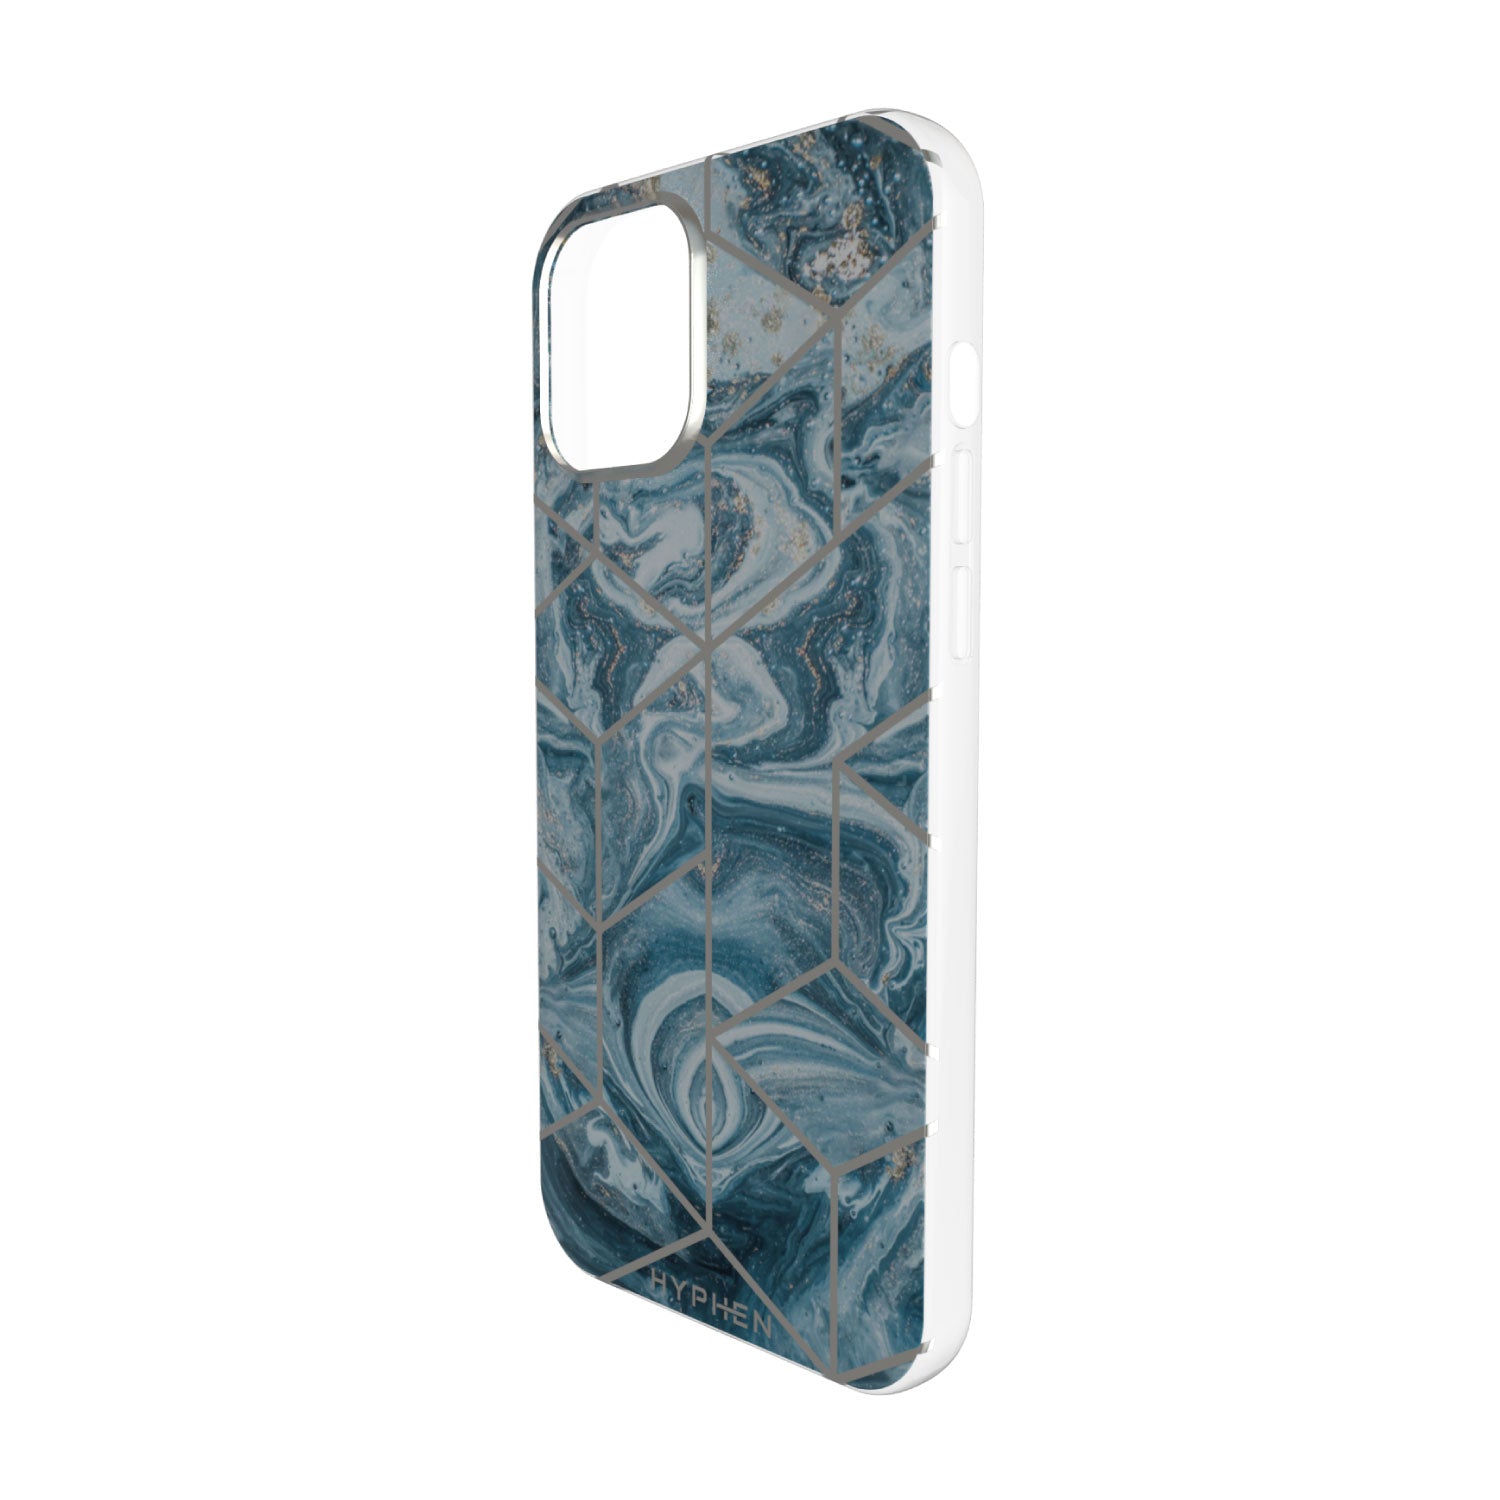 HYPHEN Marble Case for iPhone 12 & 12 Pro - TECH STREET